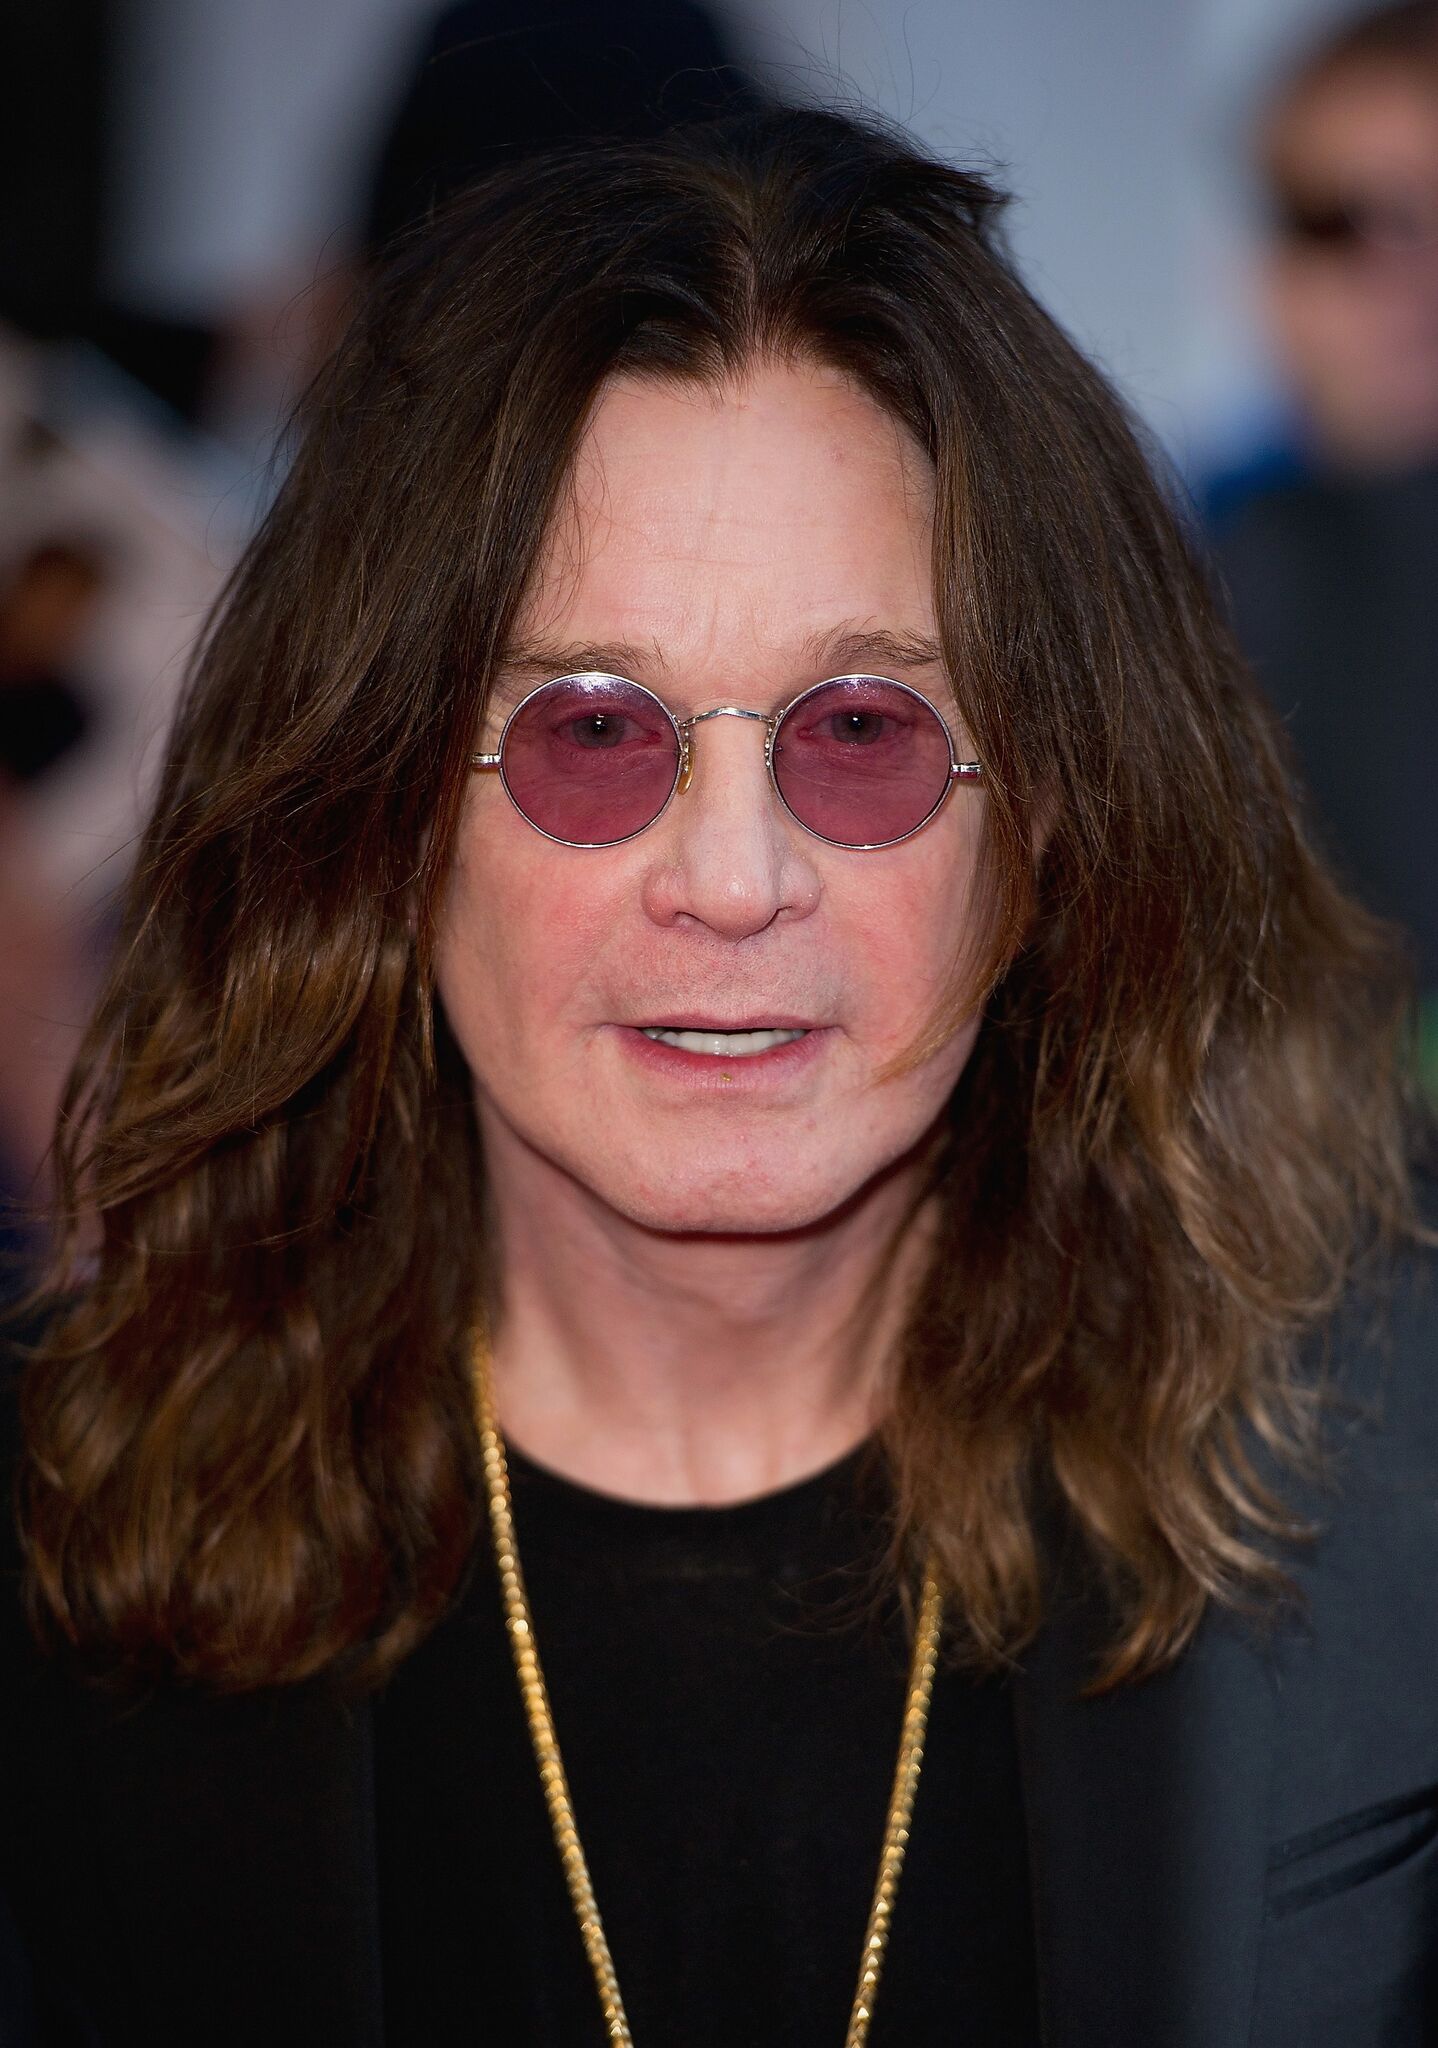 Ozzy Osbourne attends the Pride of Britain awards at The Grosvenor House Hotel  | Getty Images